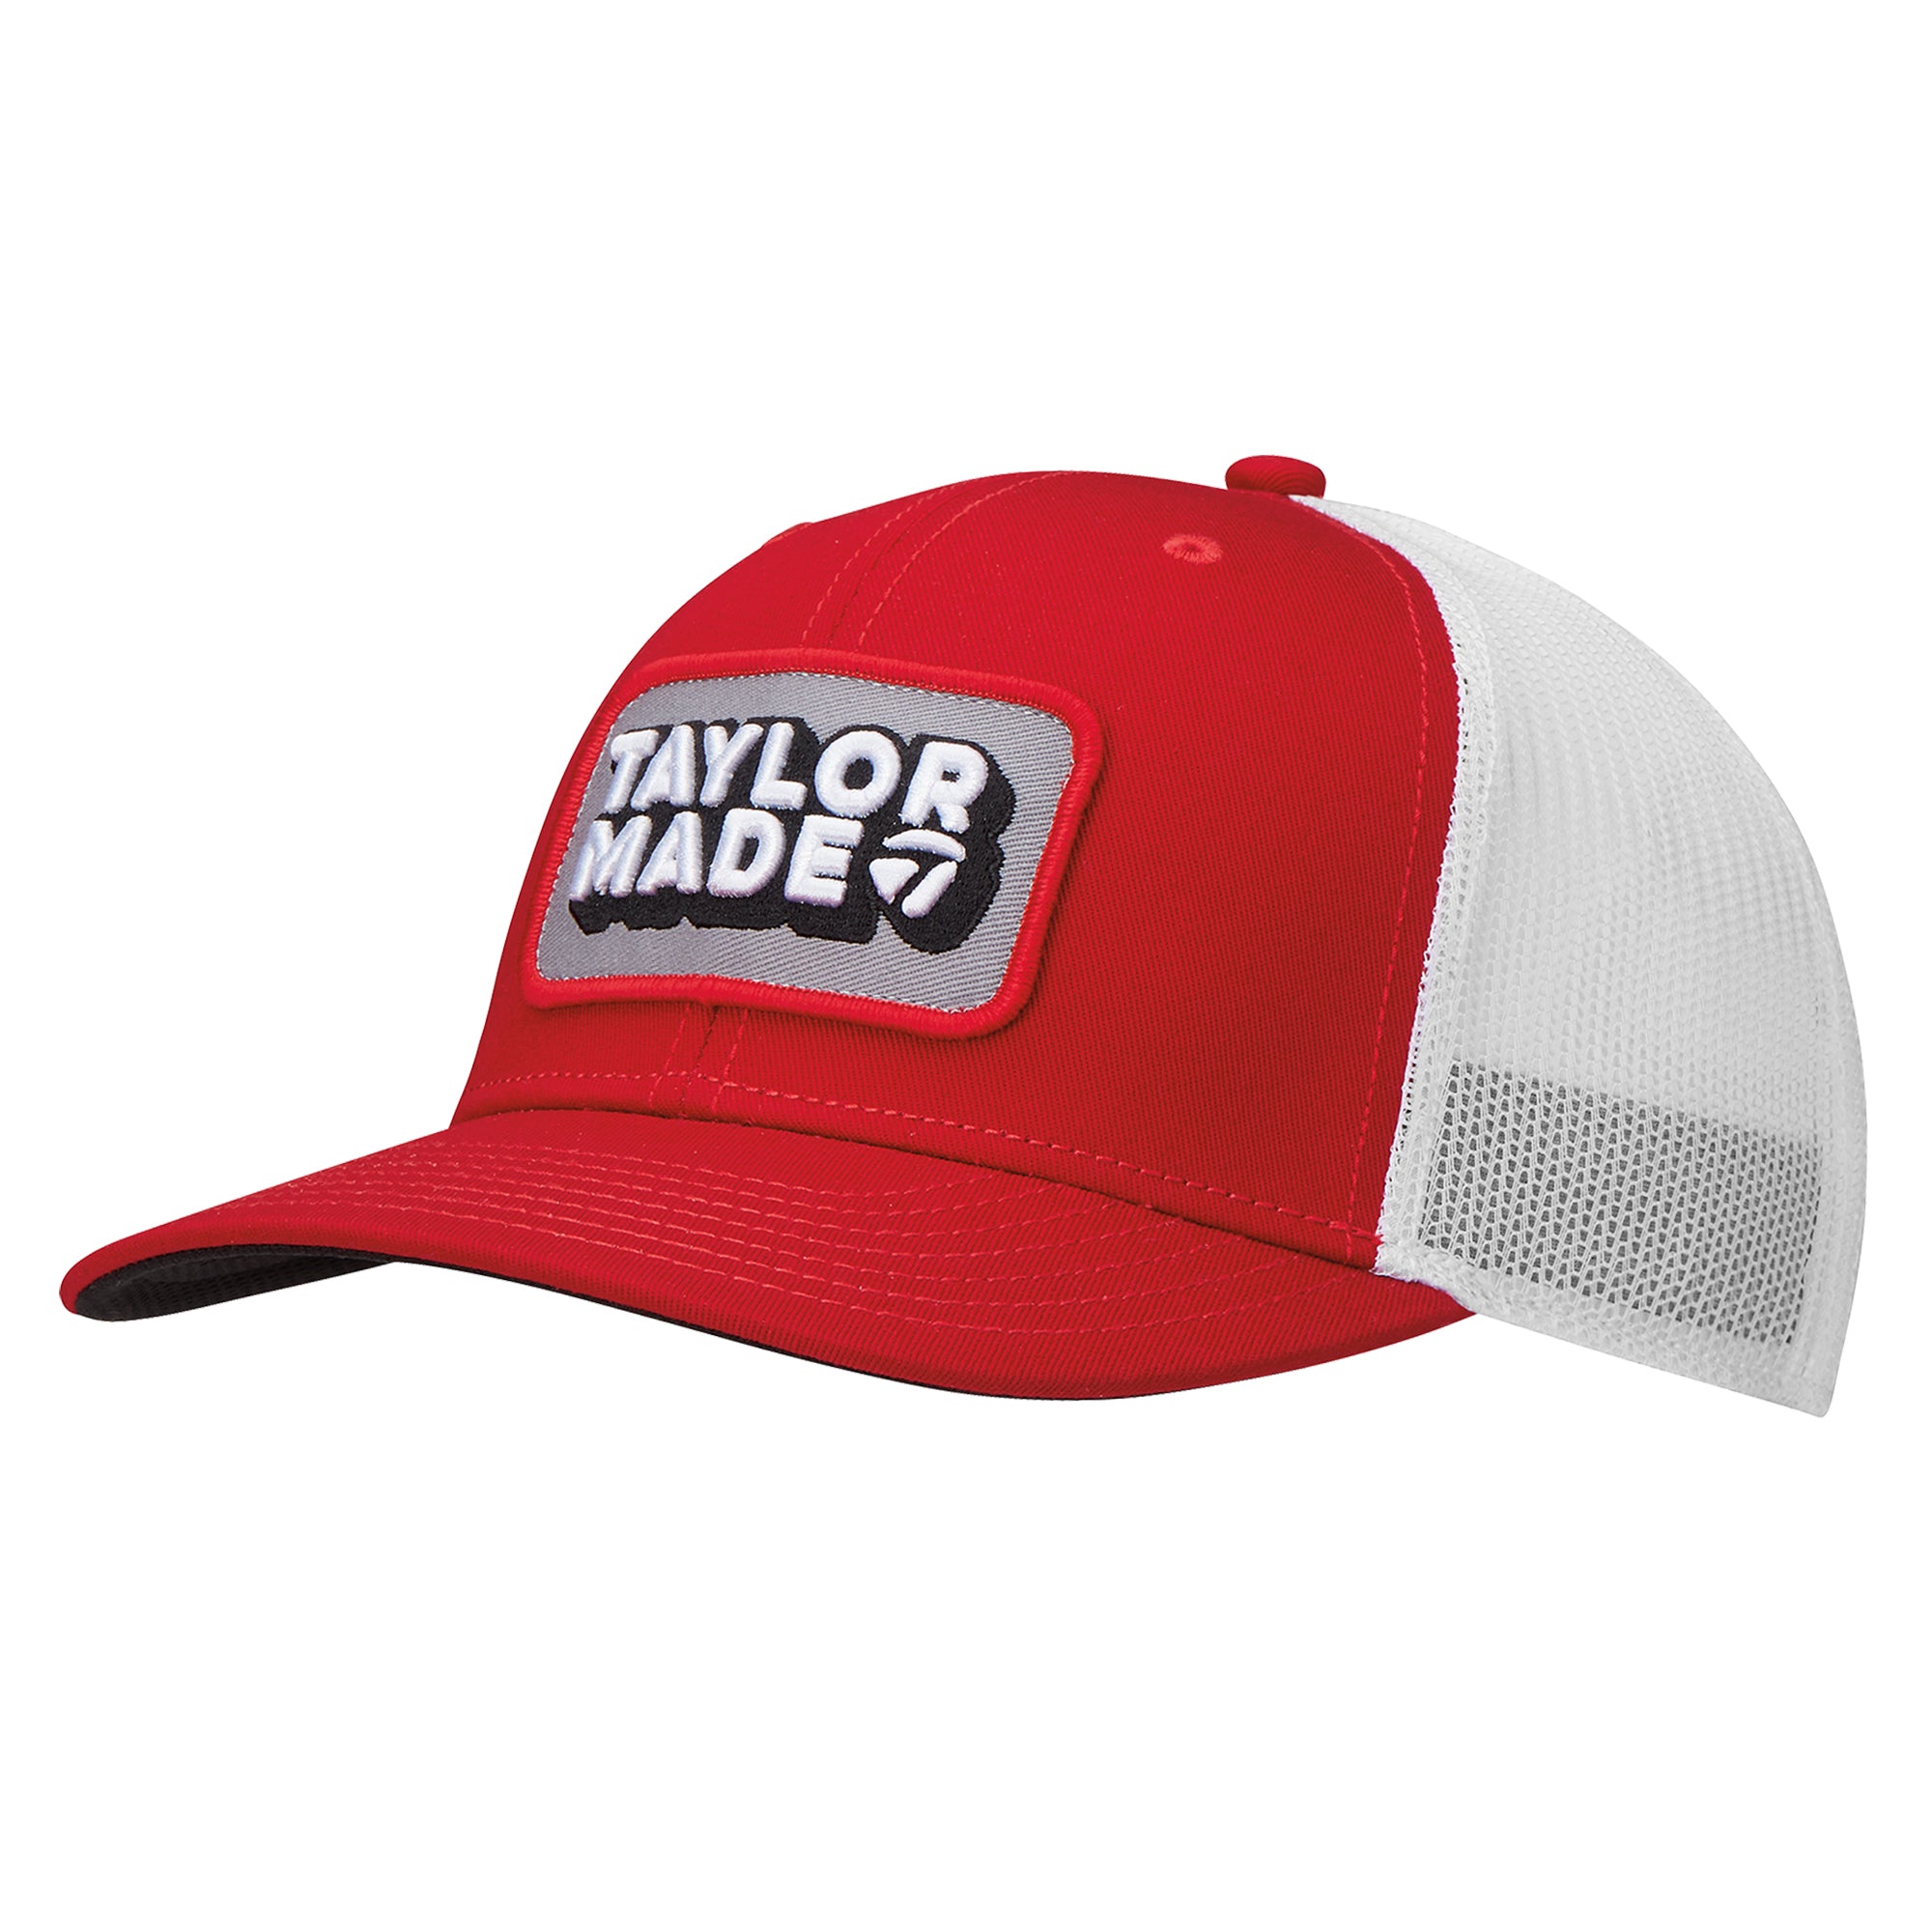 taylormade-lifestyle-retro-trucker-cap-n26817-red-white